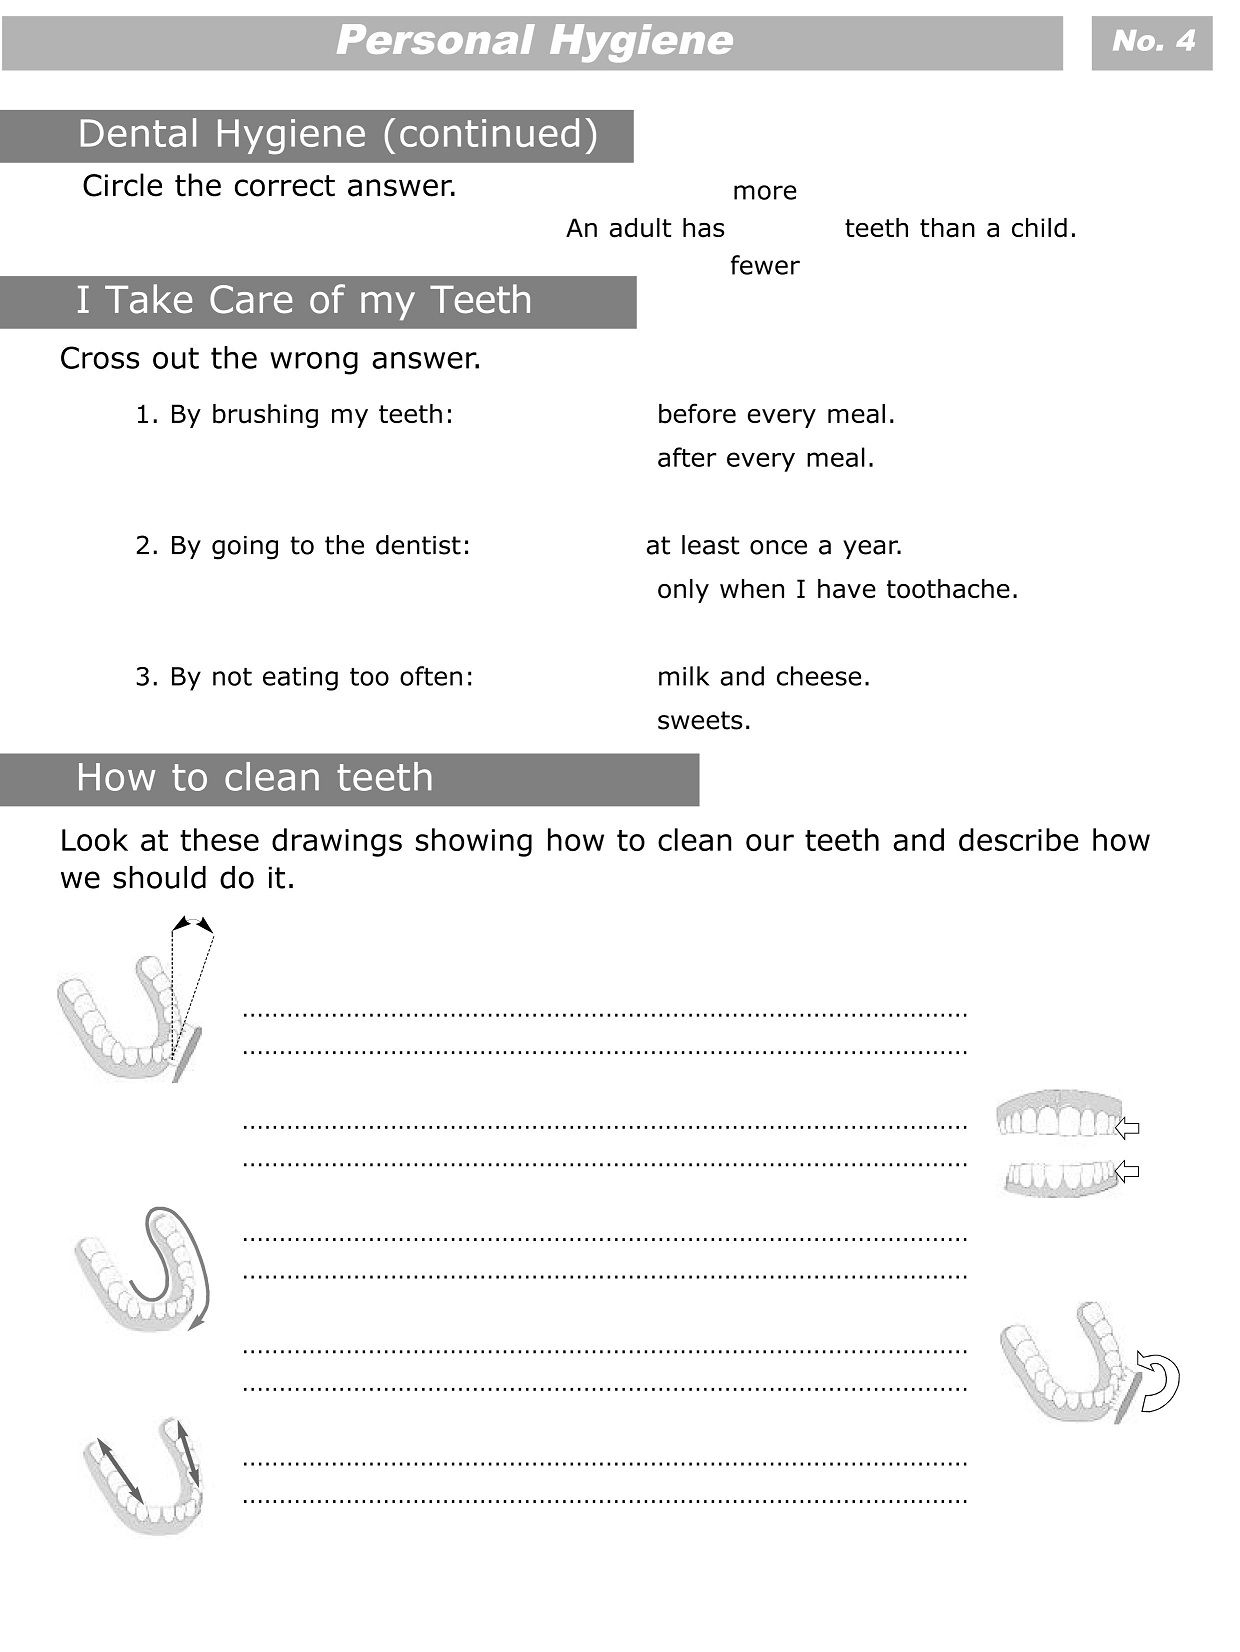 Personal Hygiene Worksheet For Kids Level 2 -4 (With Images